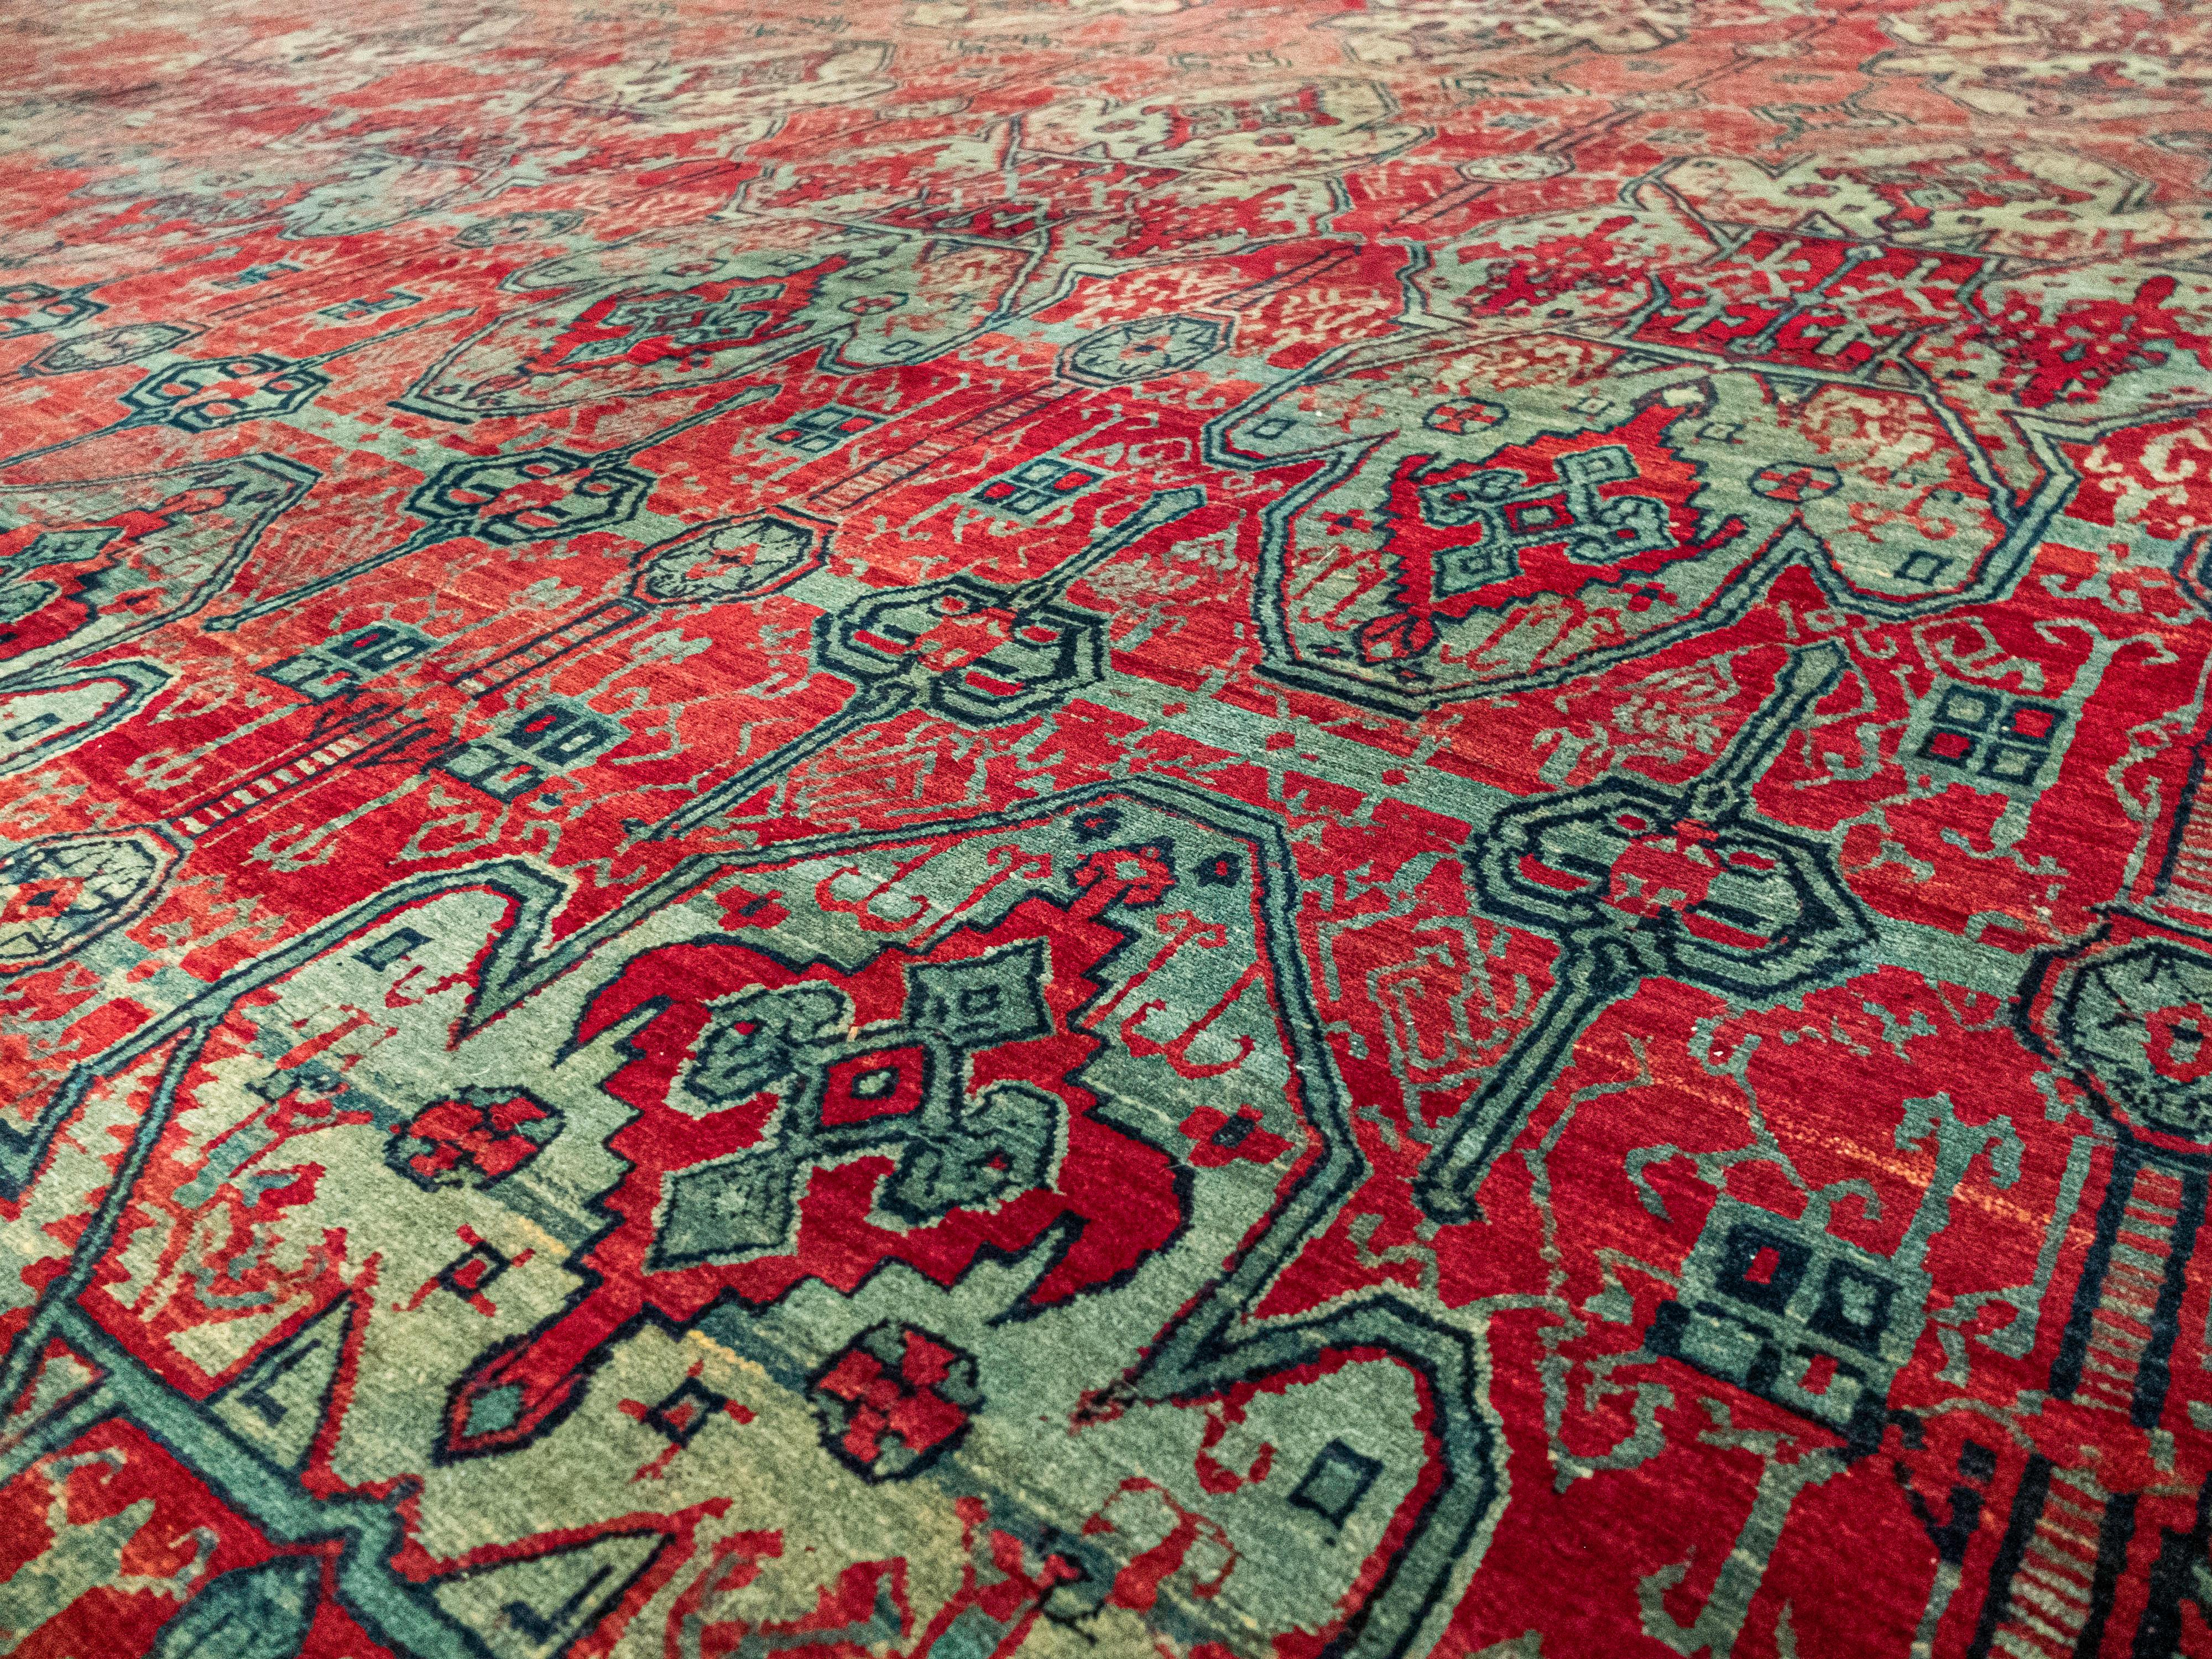 This is a uniquely patterned antique Khorasan Rug. It has intricate detailing in the main field and uses deep reds, and light greenish blues. It then has a slightly contrasting vine patterned border with pops of yellow. These specific dyes are known